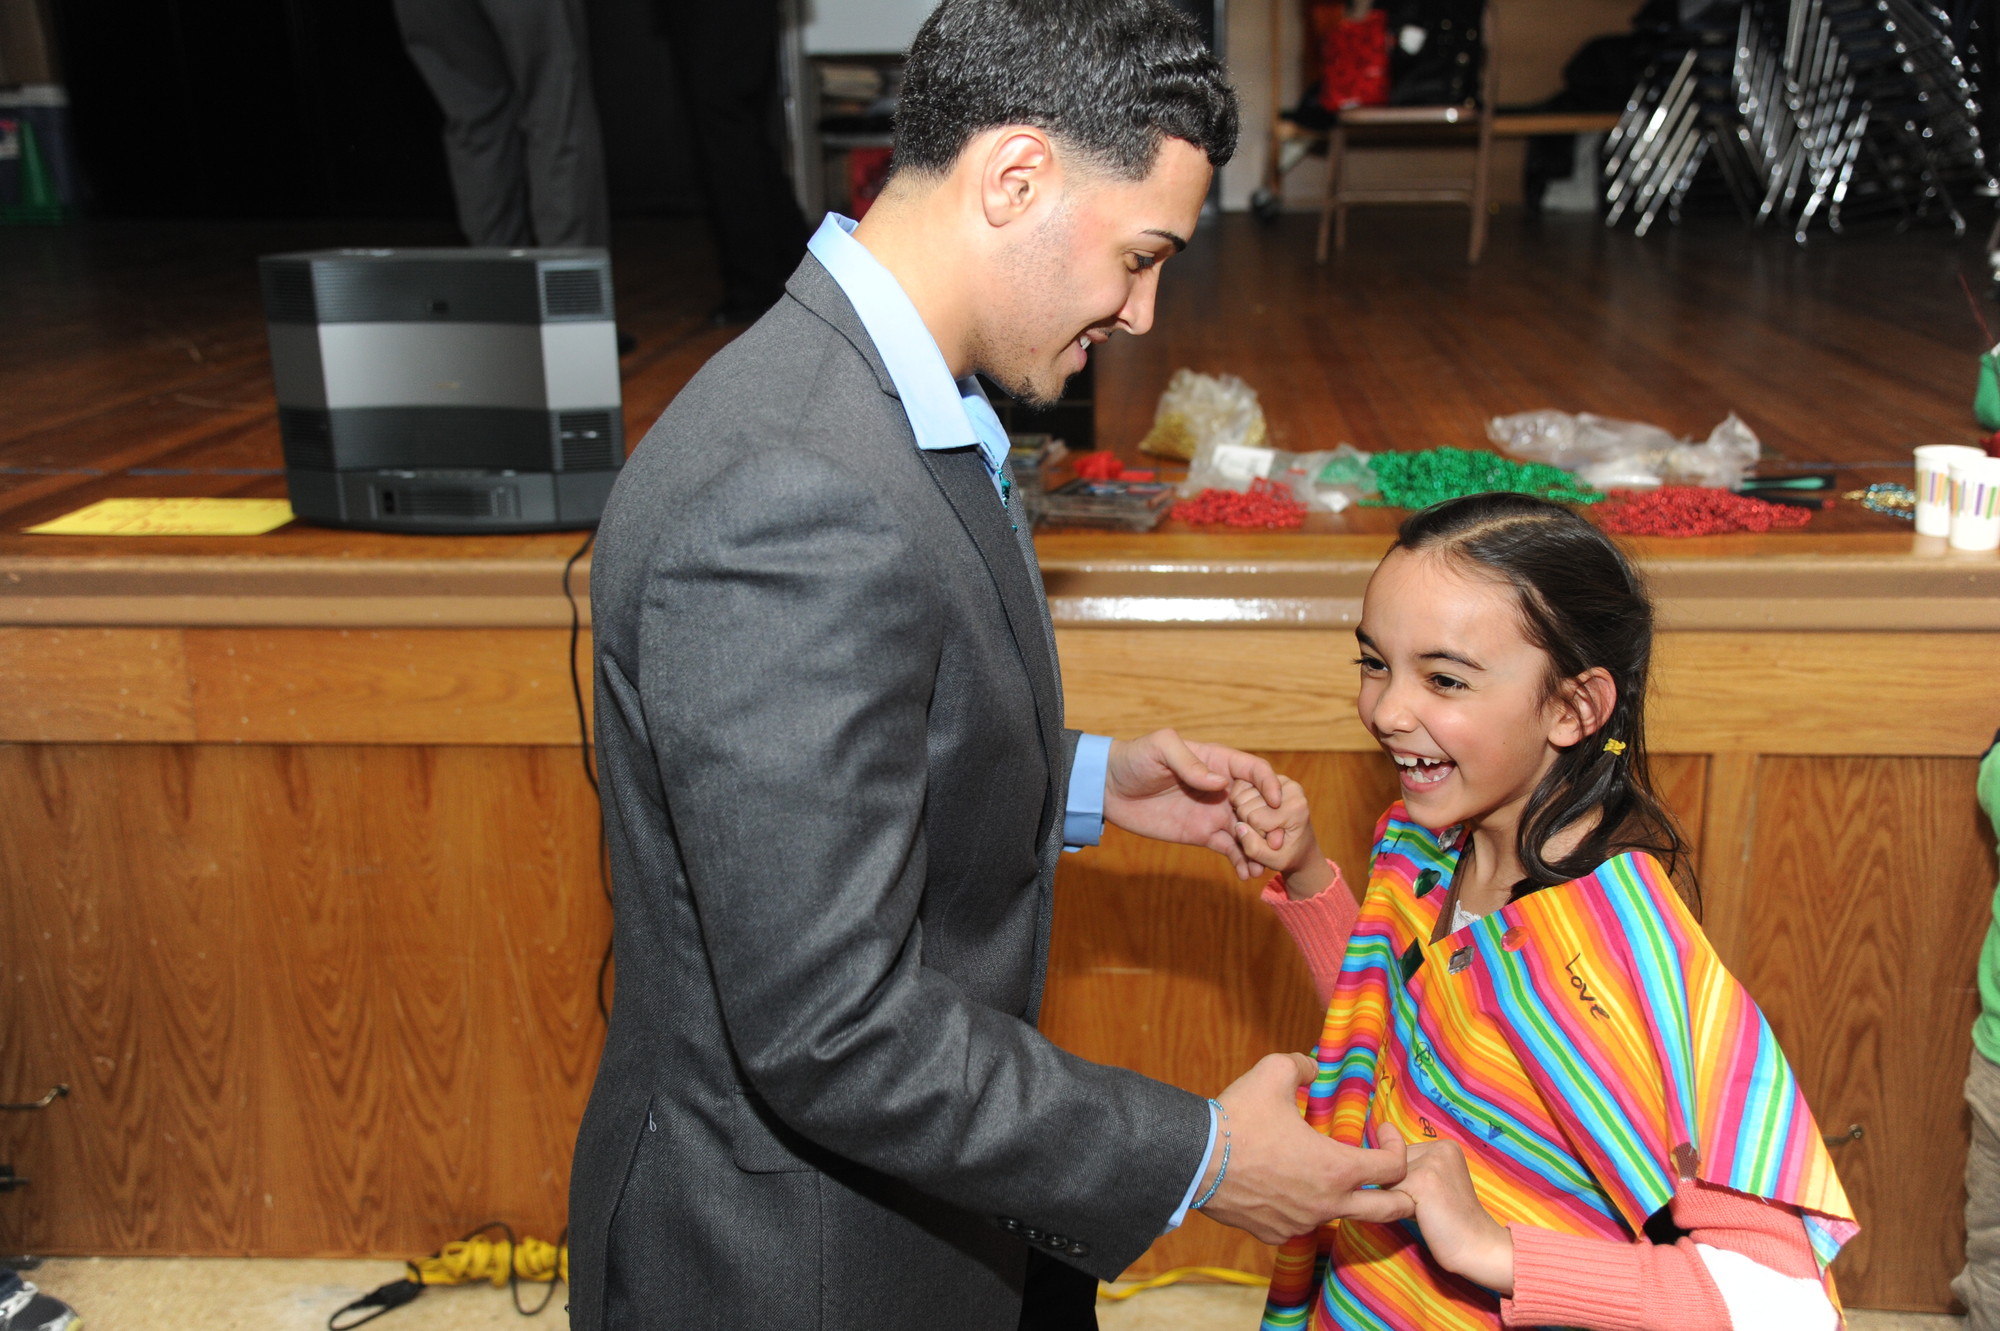 Marcus Ramirez taught Girl Scout Sevi Ozgur, 8, to salsa during his cousin Melina Ramirez’s Latina Cultural Workshop at Meadowbrook Elementary School on March 28.